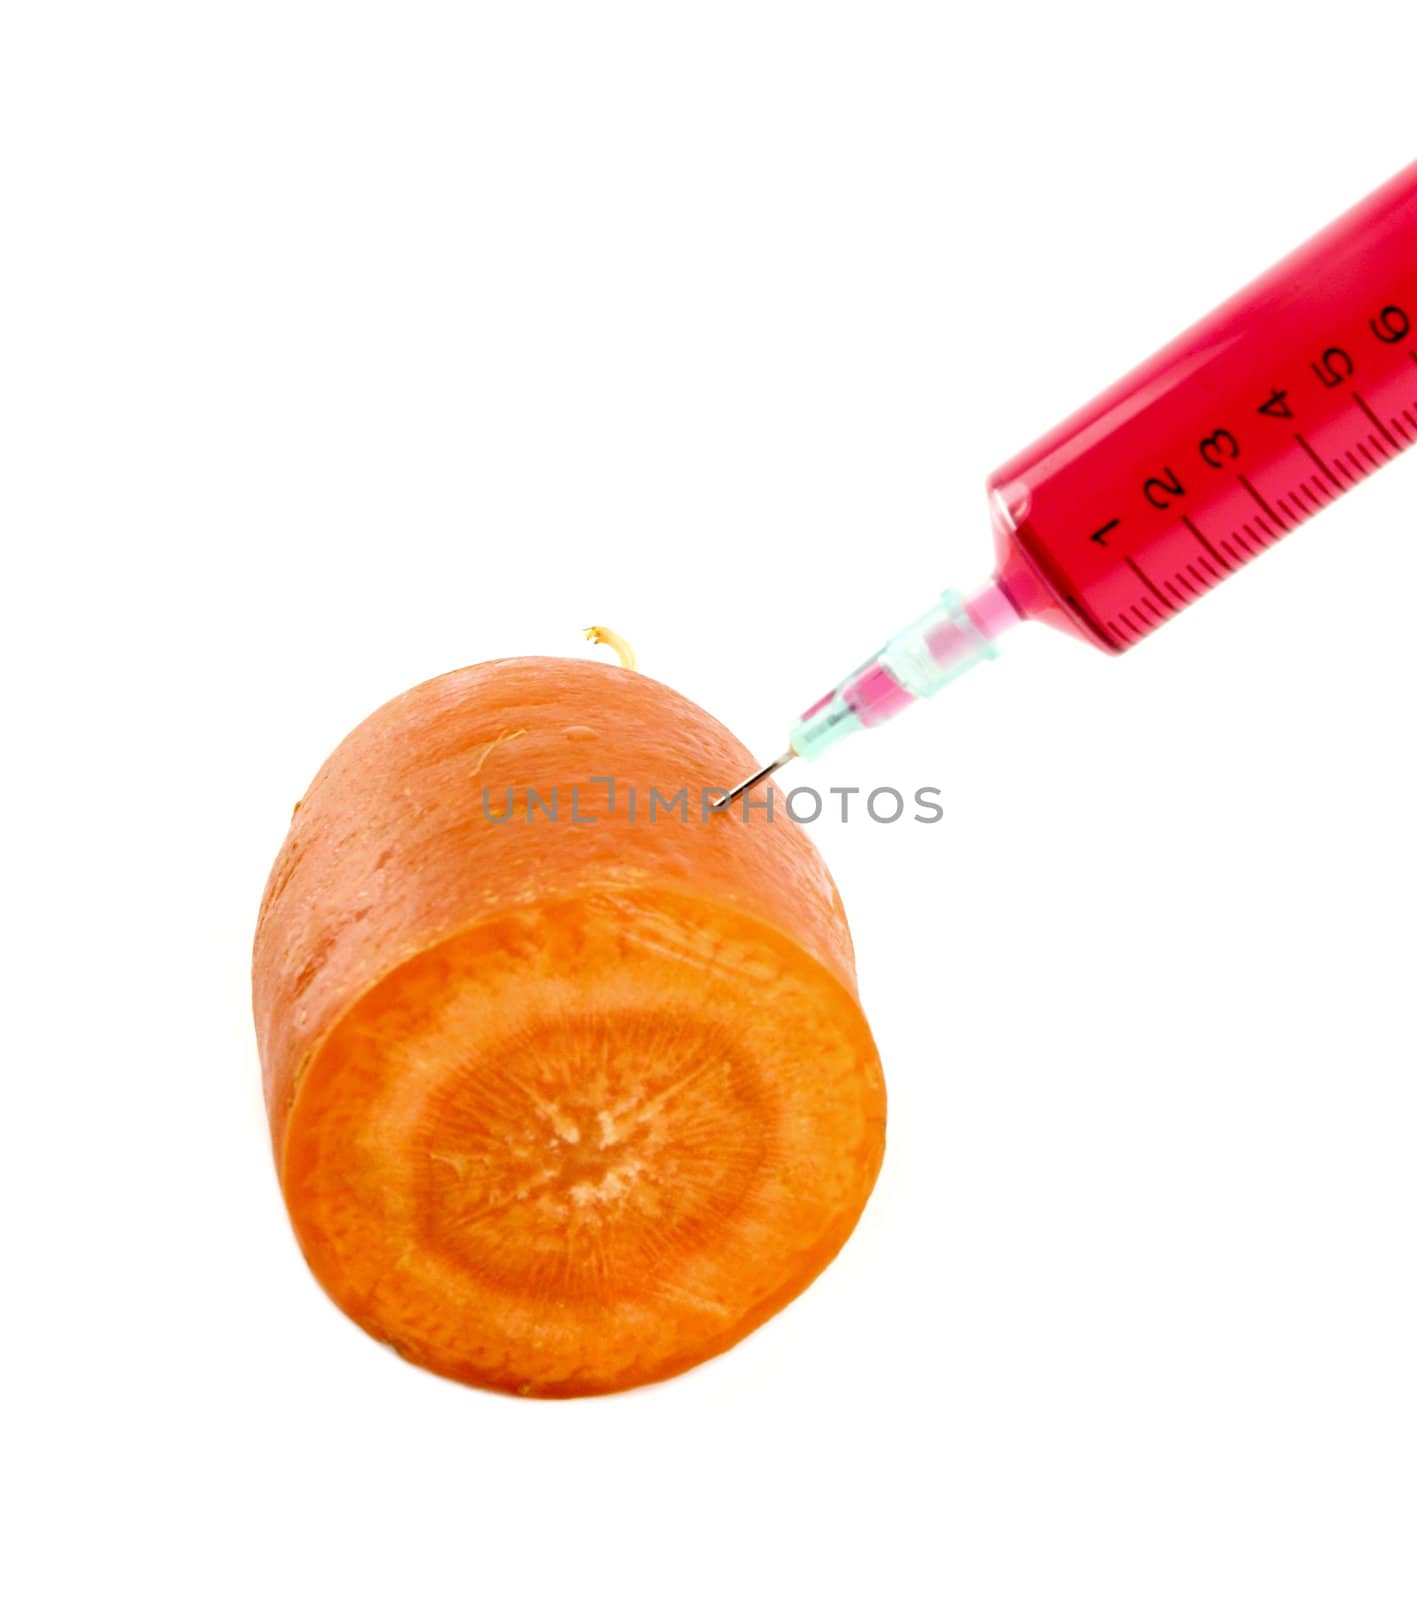 carrot with syringe injected isolated on white background